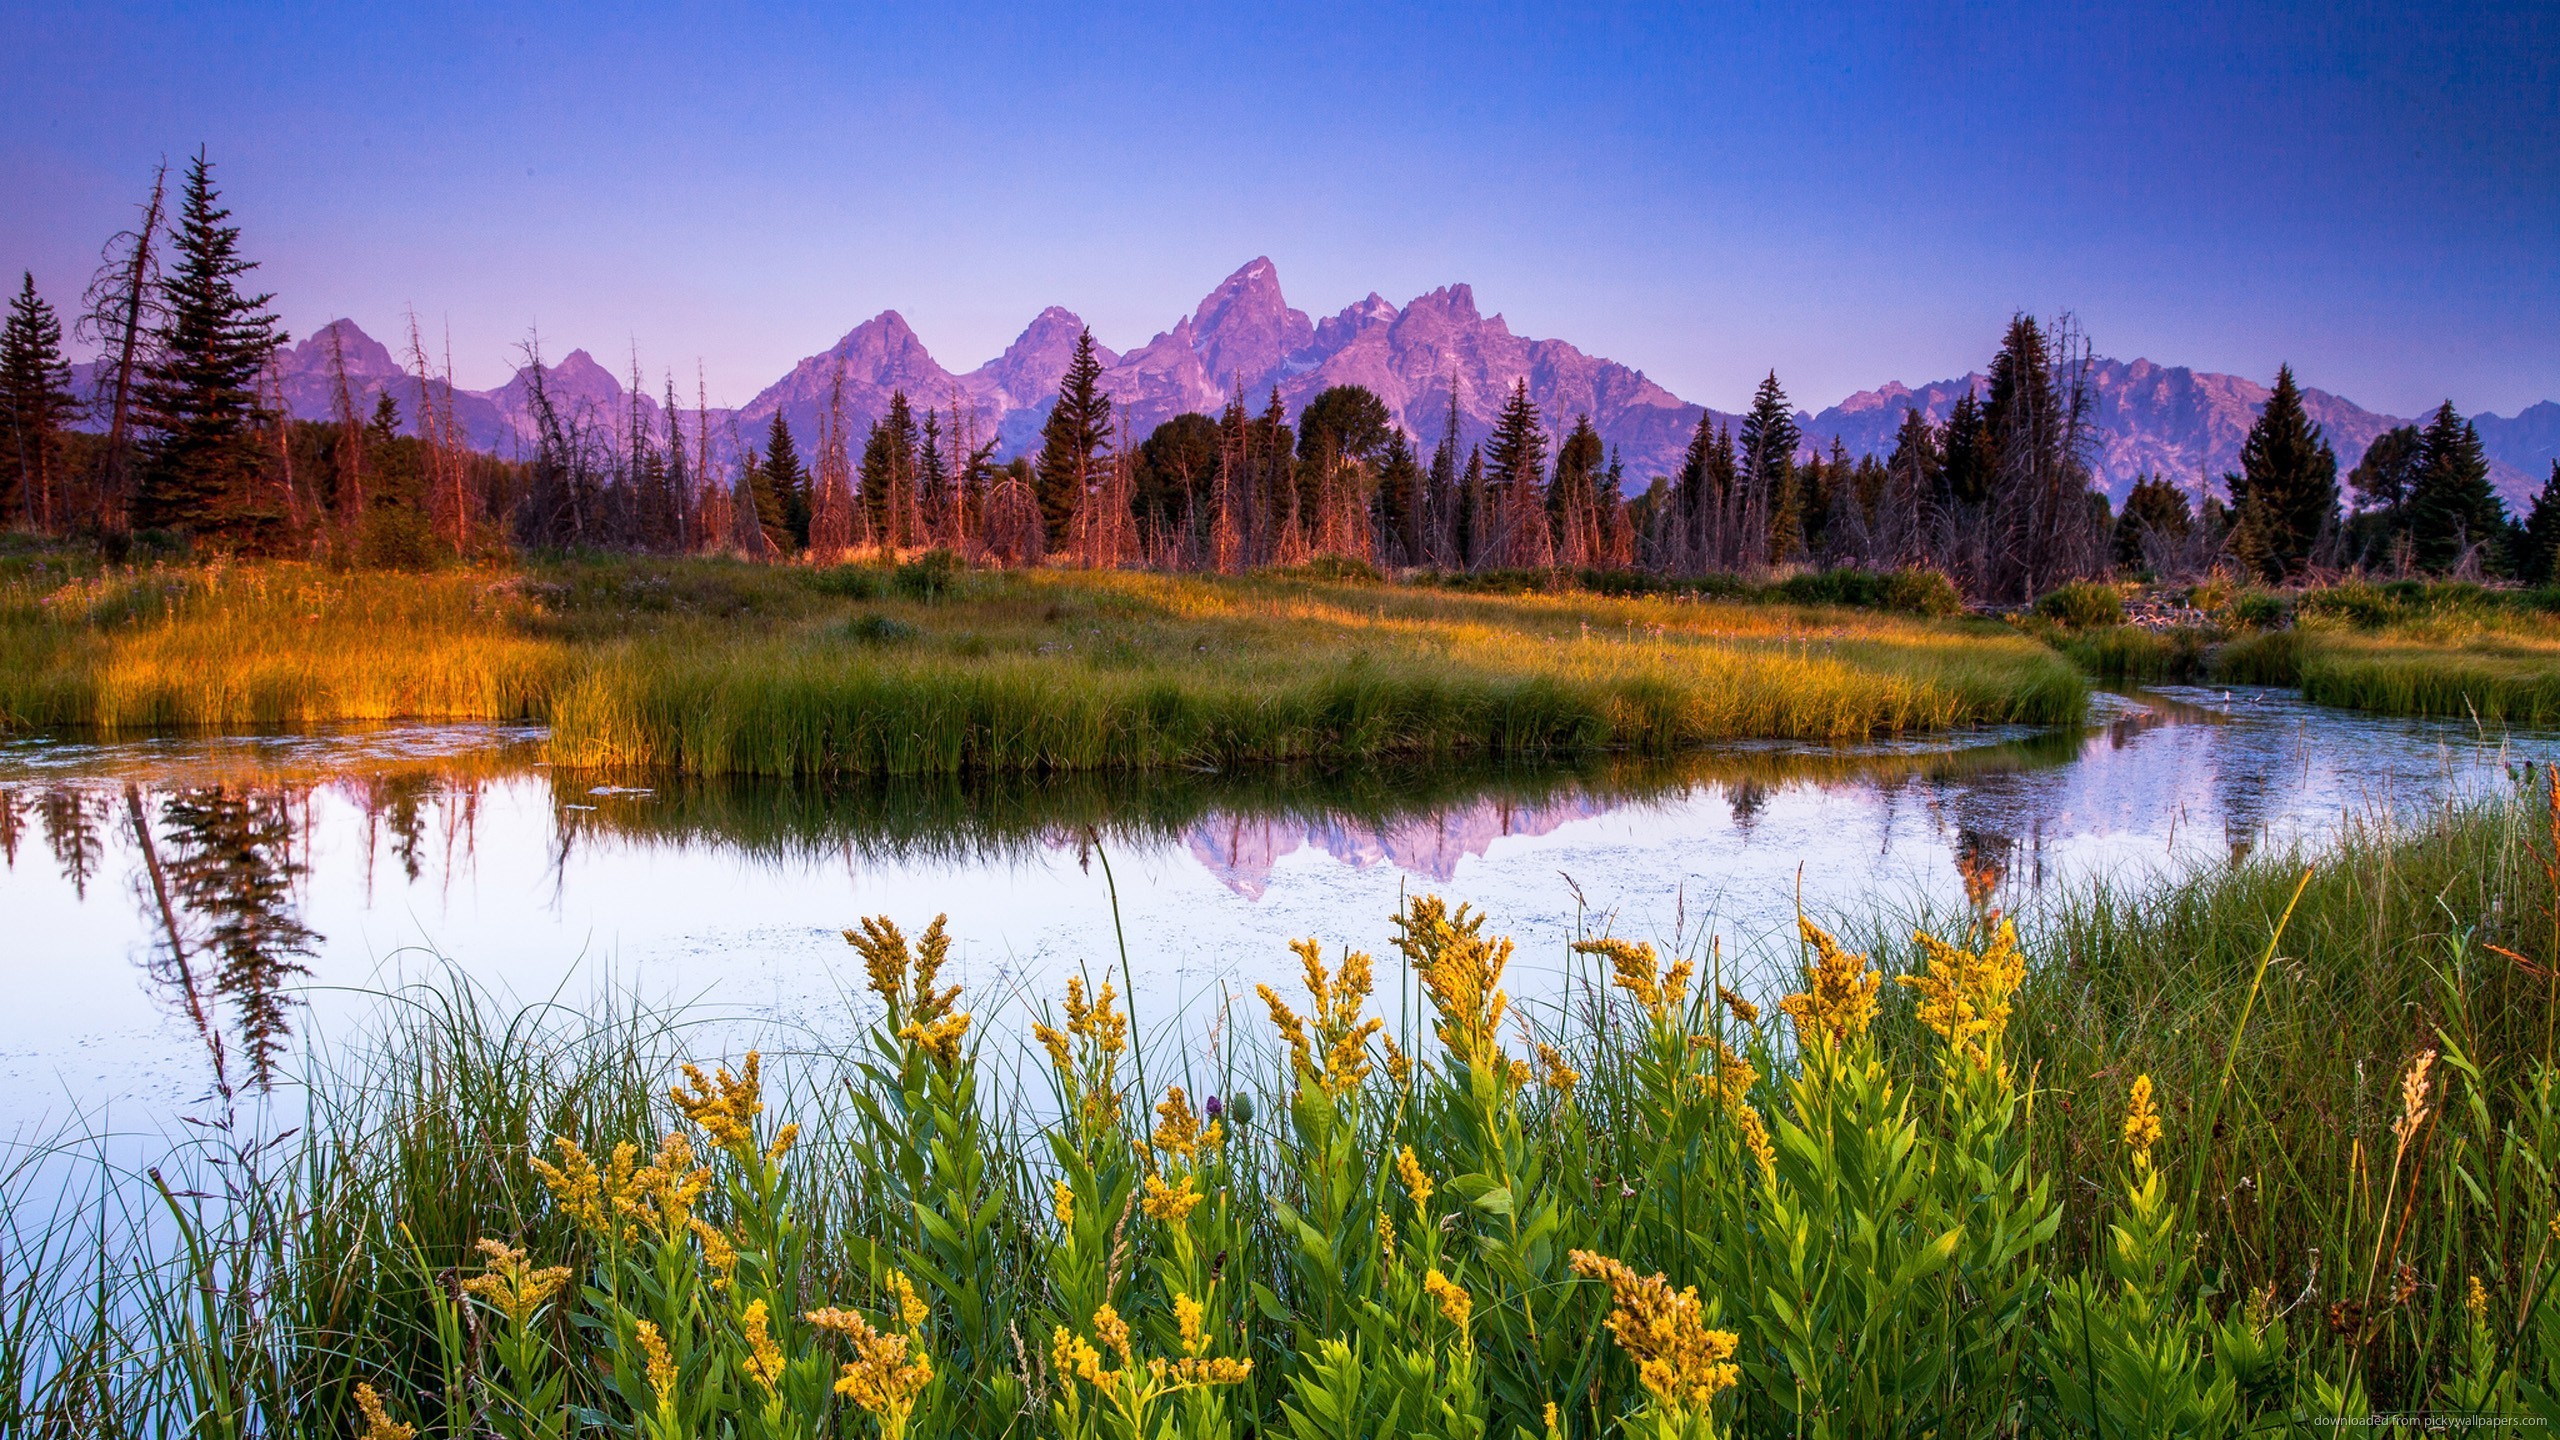 General 2560x1440 flowers mountains river water landscape grass